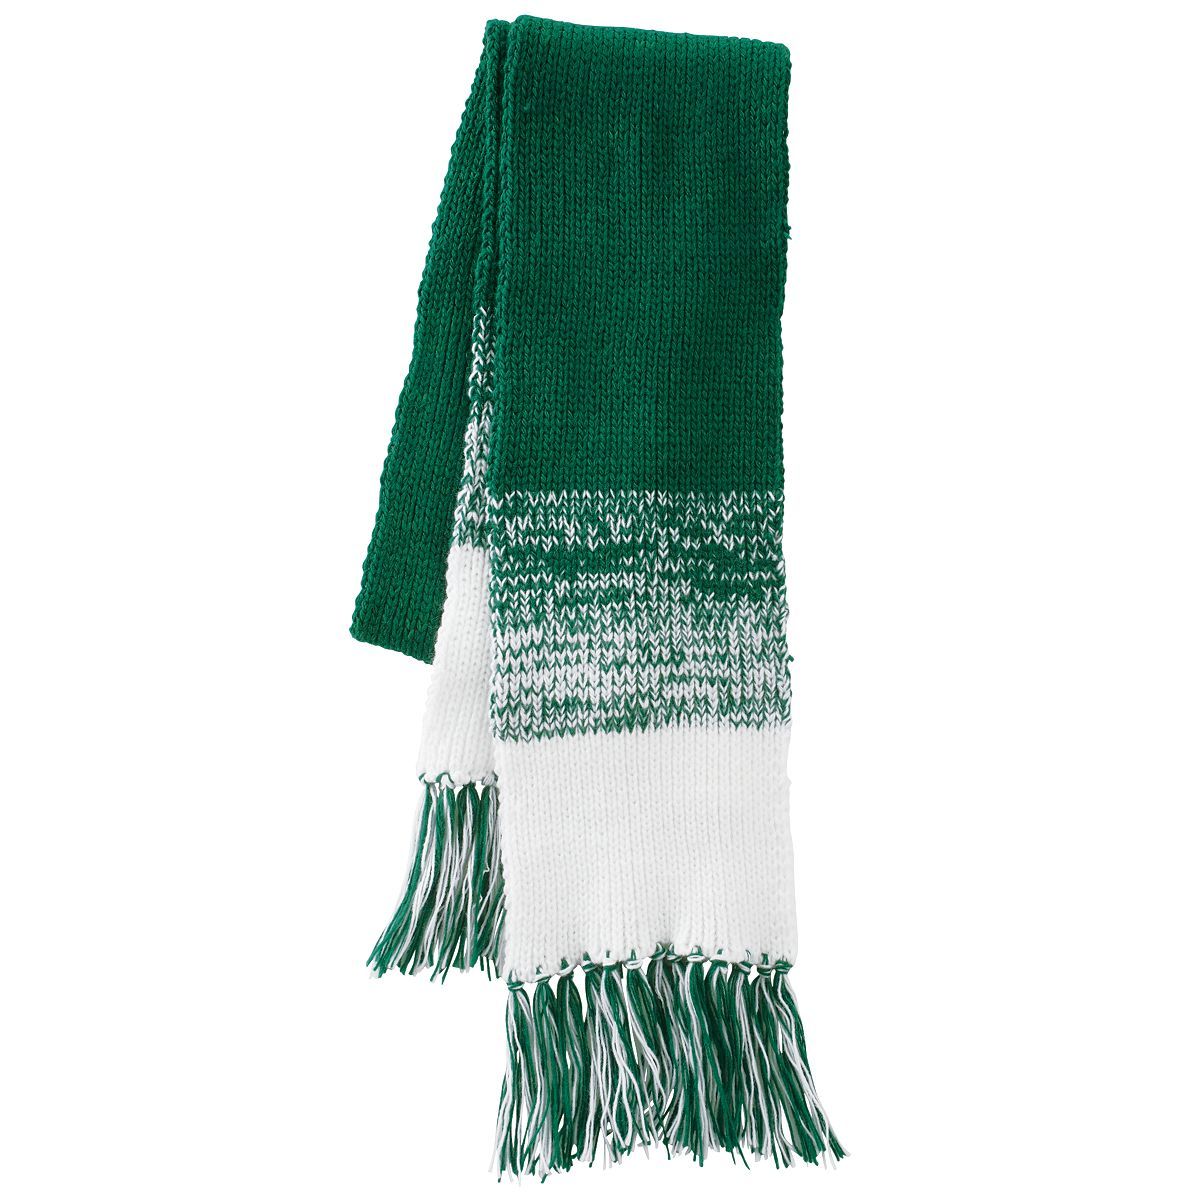 ASCENT SCARF from Holloway